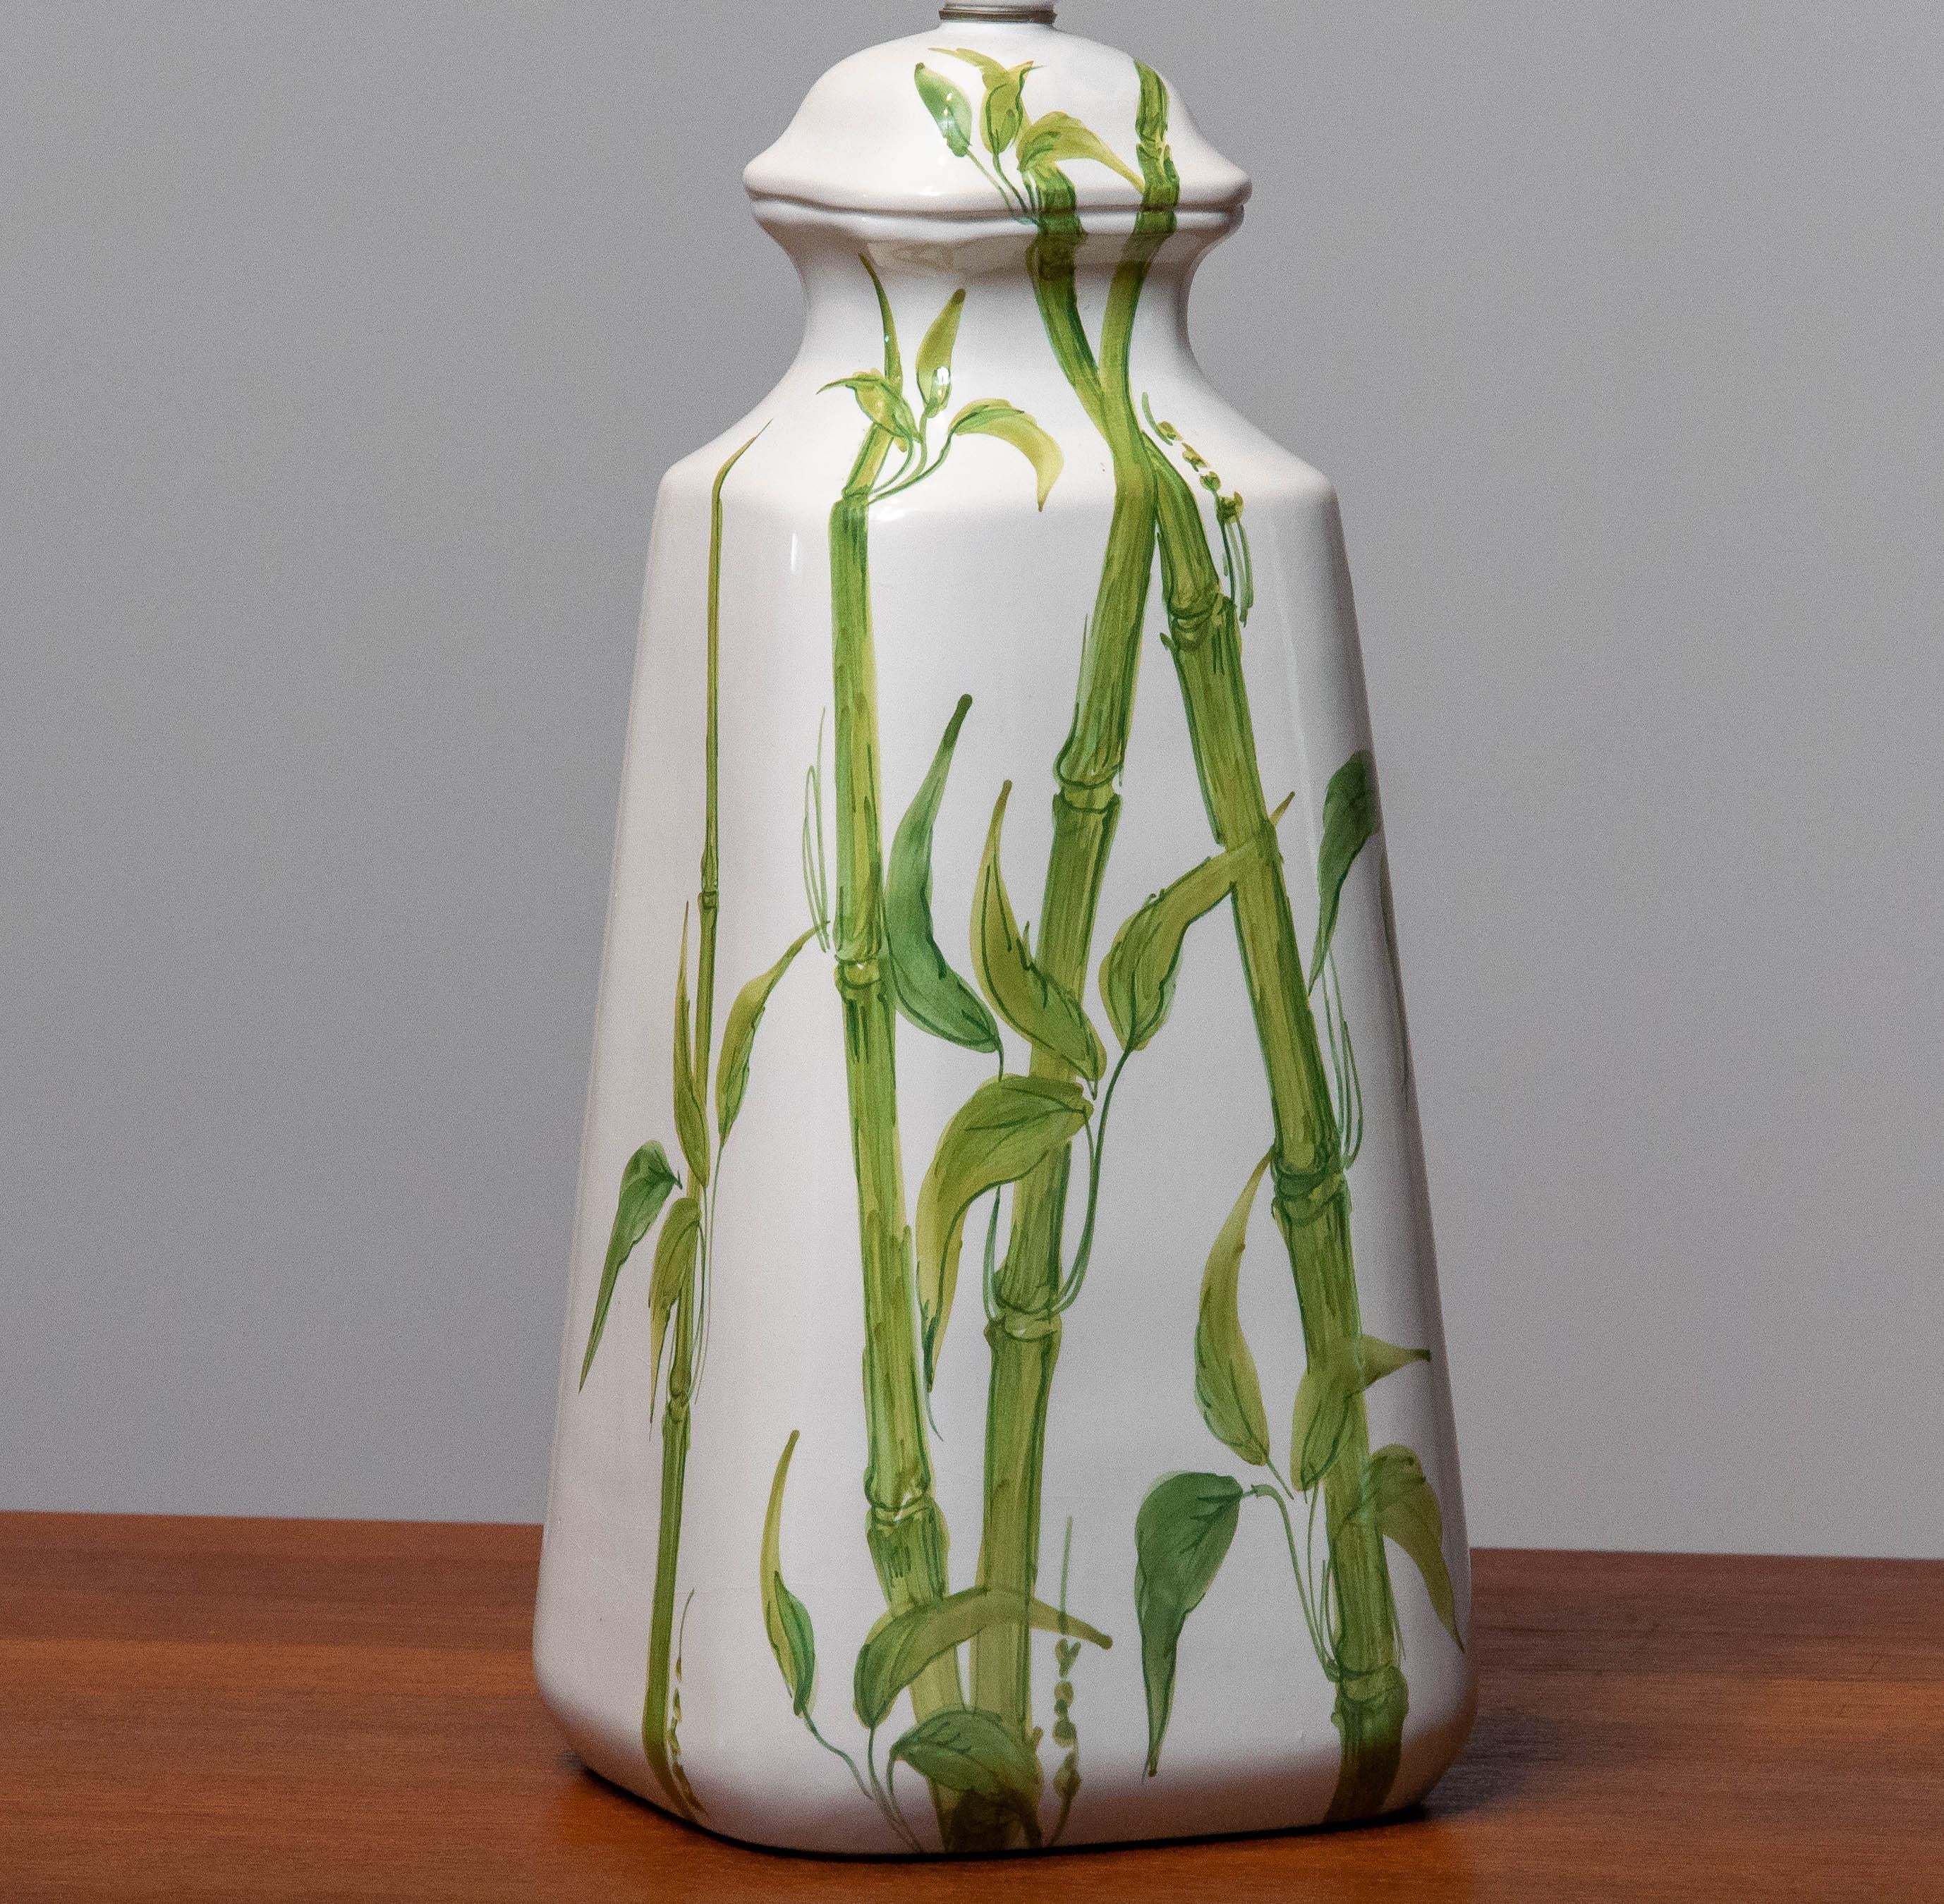 1960s Italian Hand Painted White Ceramic and Glazed Table Lamp with Bamboo Decor For Sale 2